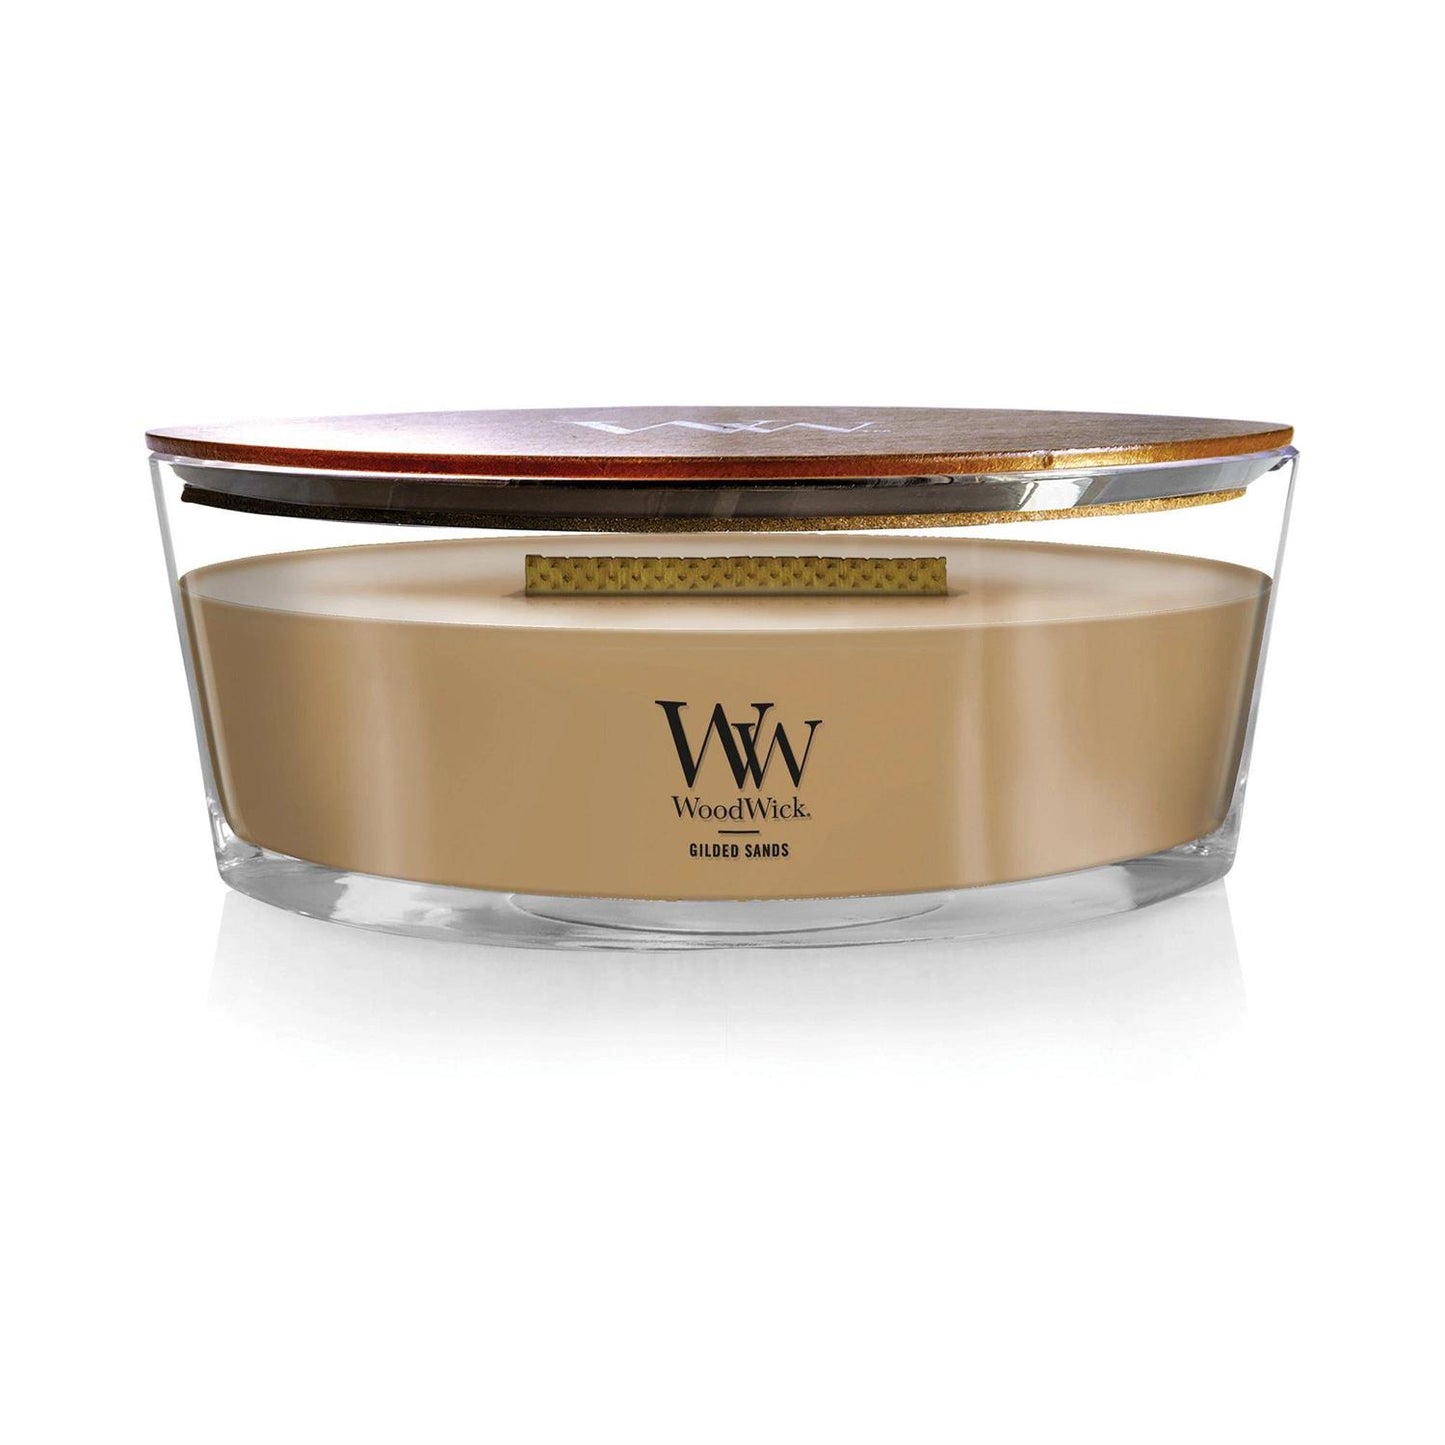 GILDED SANDS Ellipse HearthWick Flame Scented Candle by WoodWick